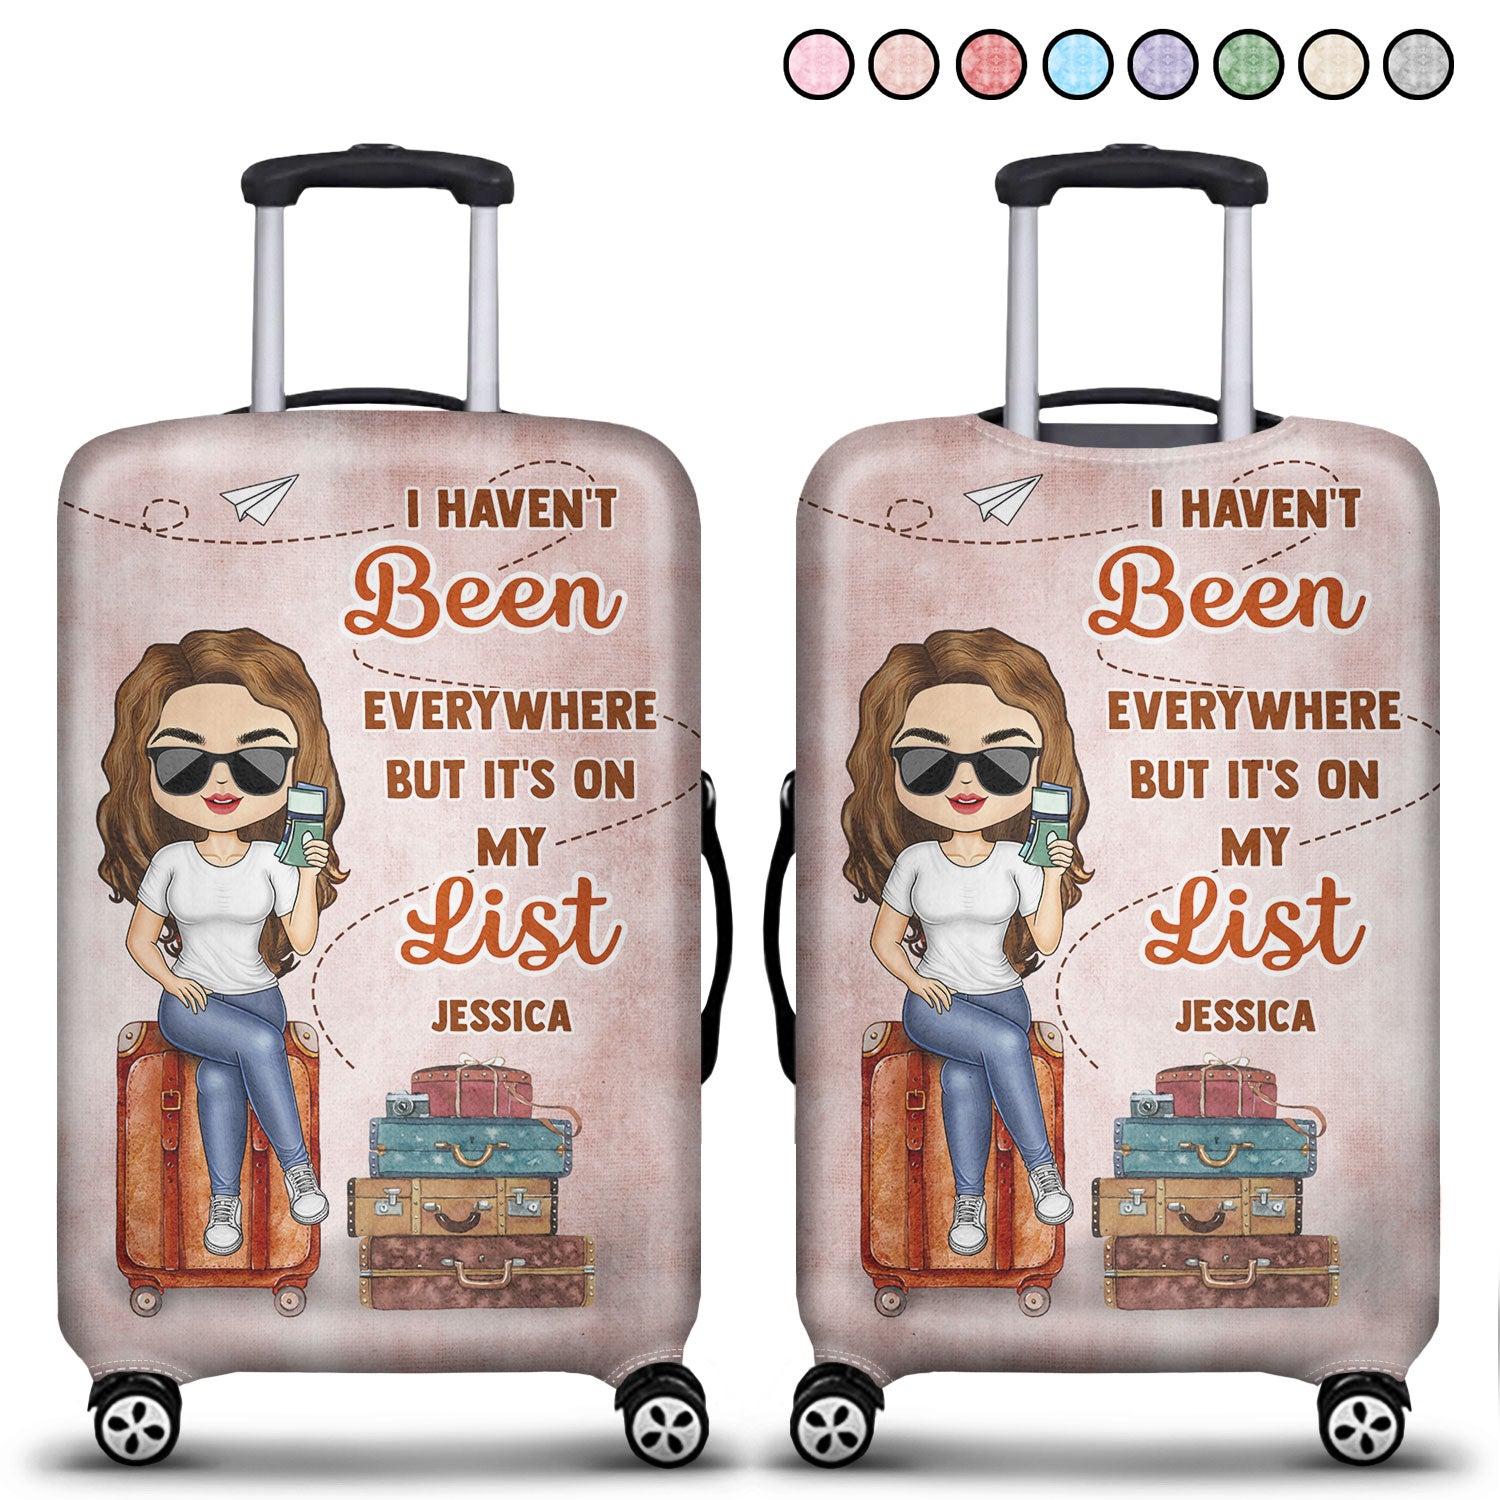 It's On My List - Gift For Traveling Lovers, Vacation Lovers, Travelers, Him, Her - Personalized Luggage Cover